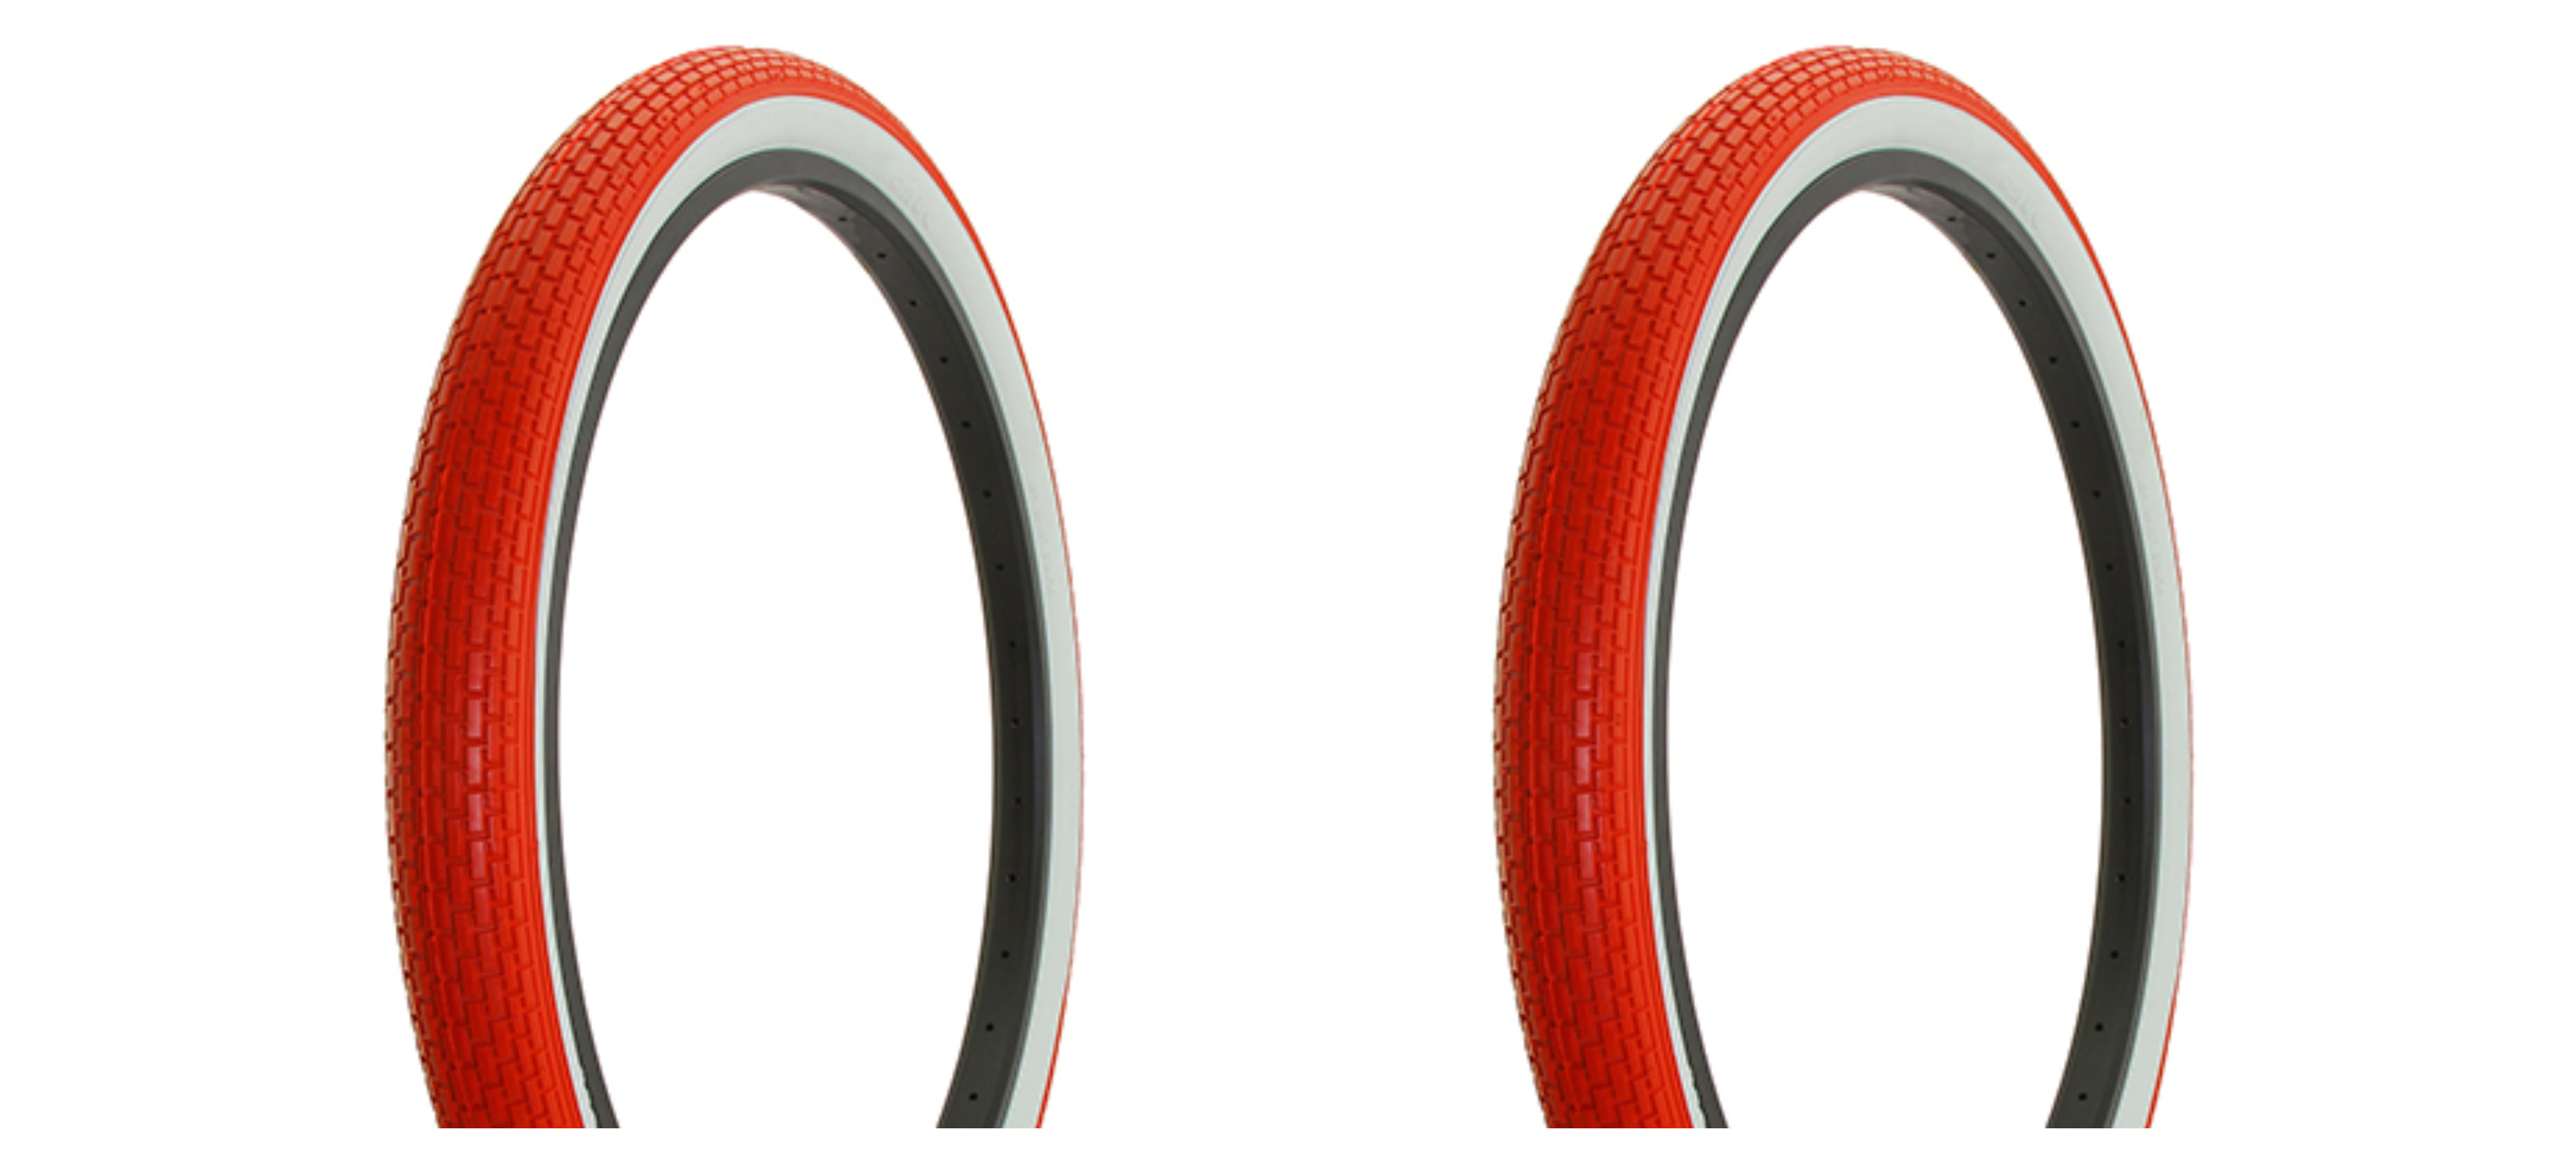 Two Tire Duro 26 x 2.125 Red/Red Side Wall HF-120A Beach Cruiser Bike tire Bike tire Cruiser Bike tire Bicycle tire 